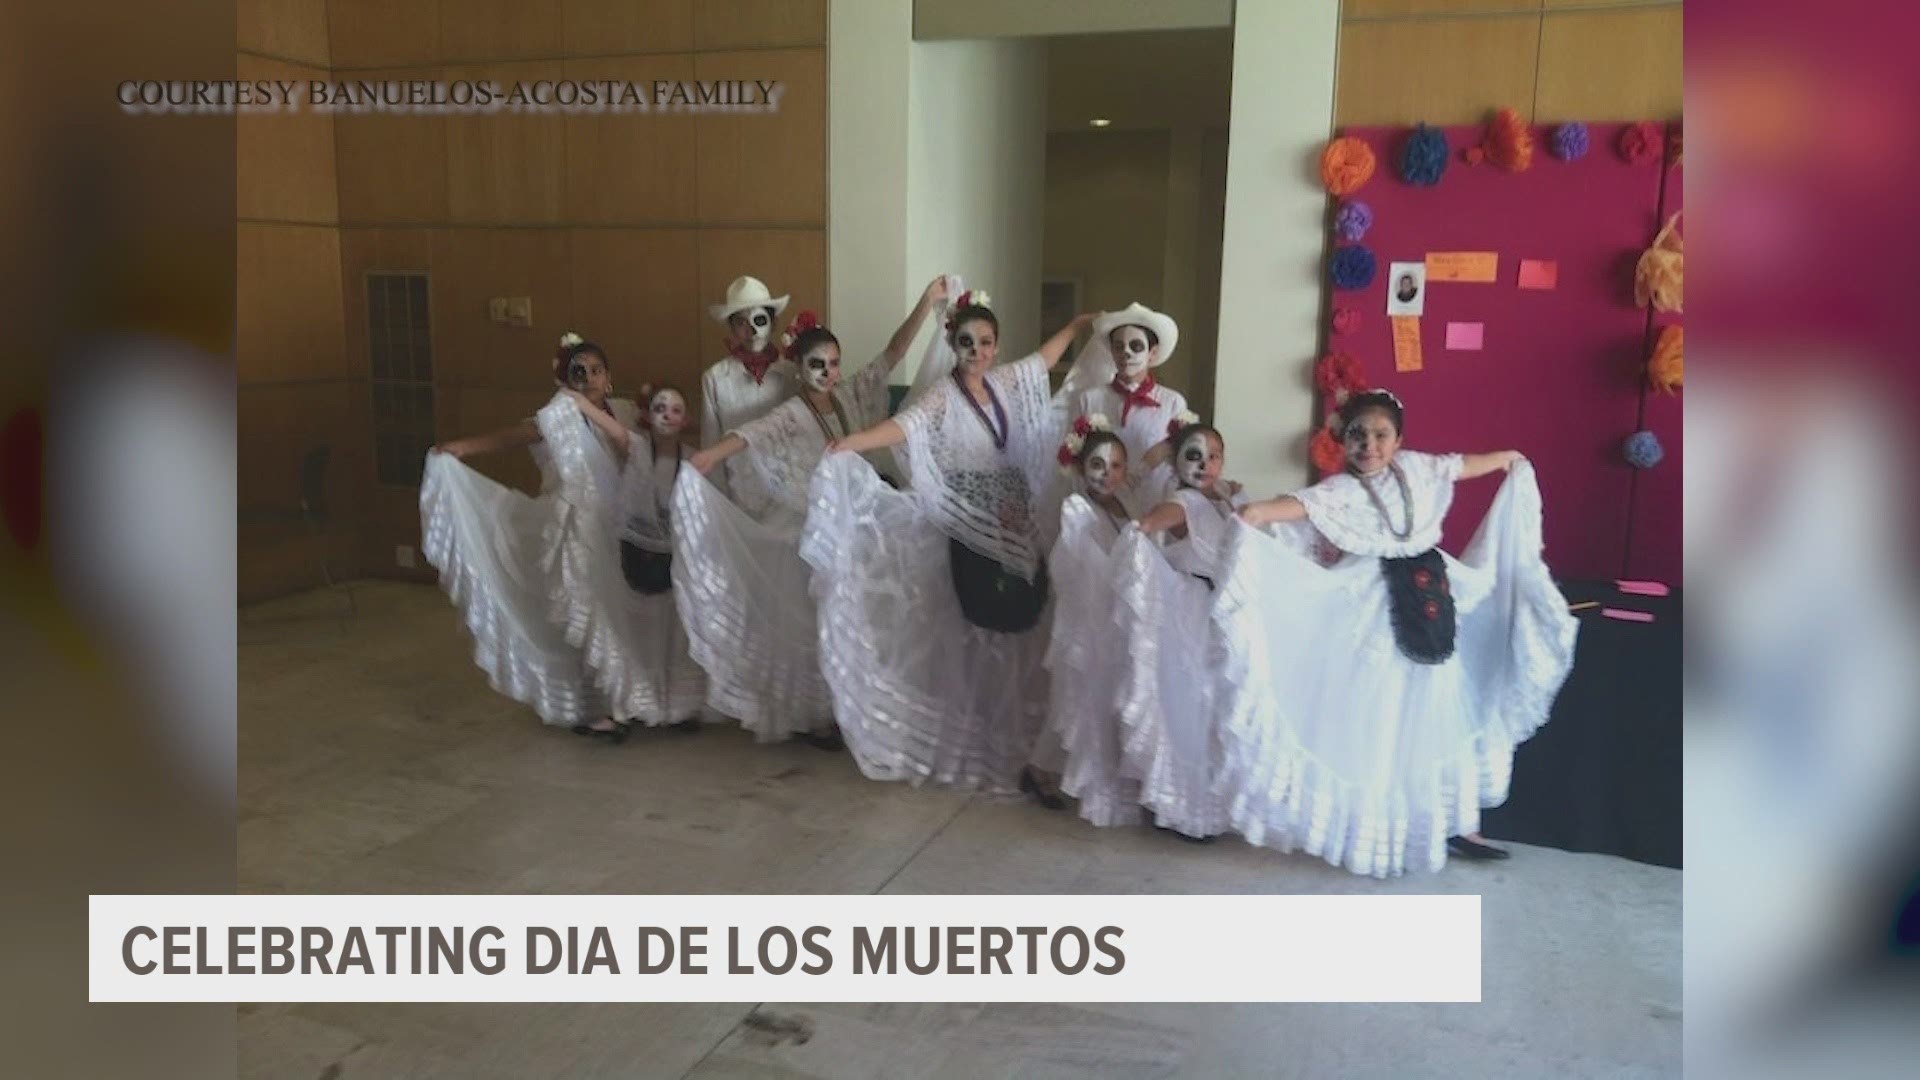 This Pleasant Hill family has gone all out to celebrate Día de los Muertos (The Day of the Dead) and they share why keeping the tradition matters even during COVID.